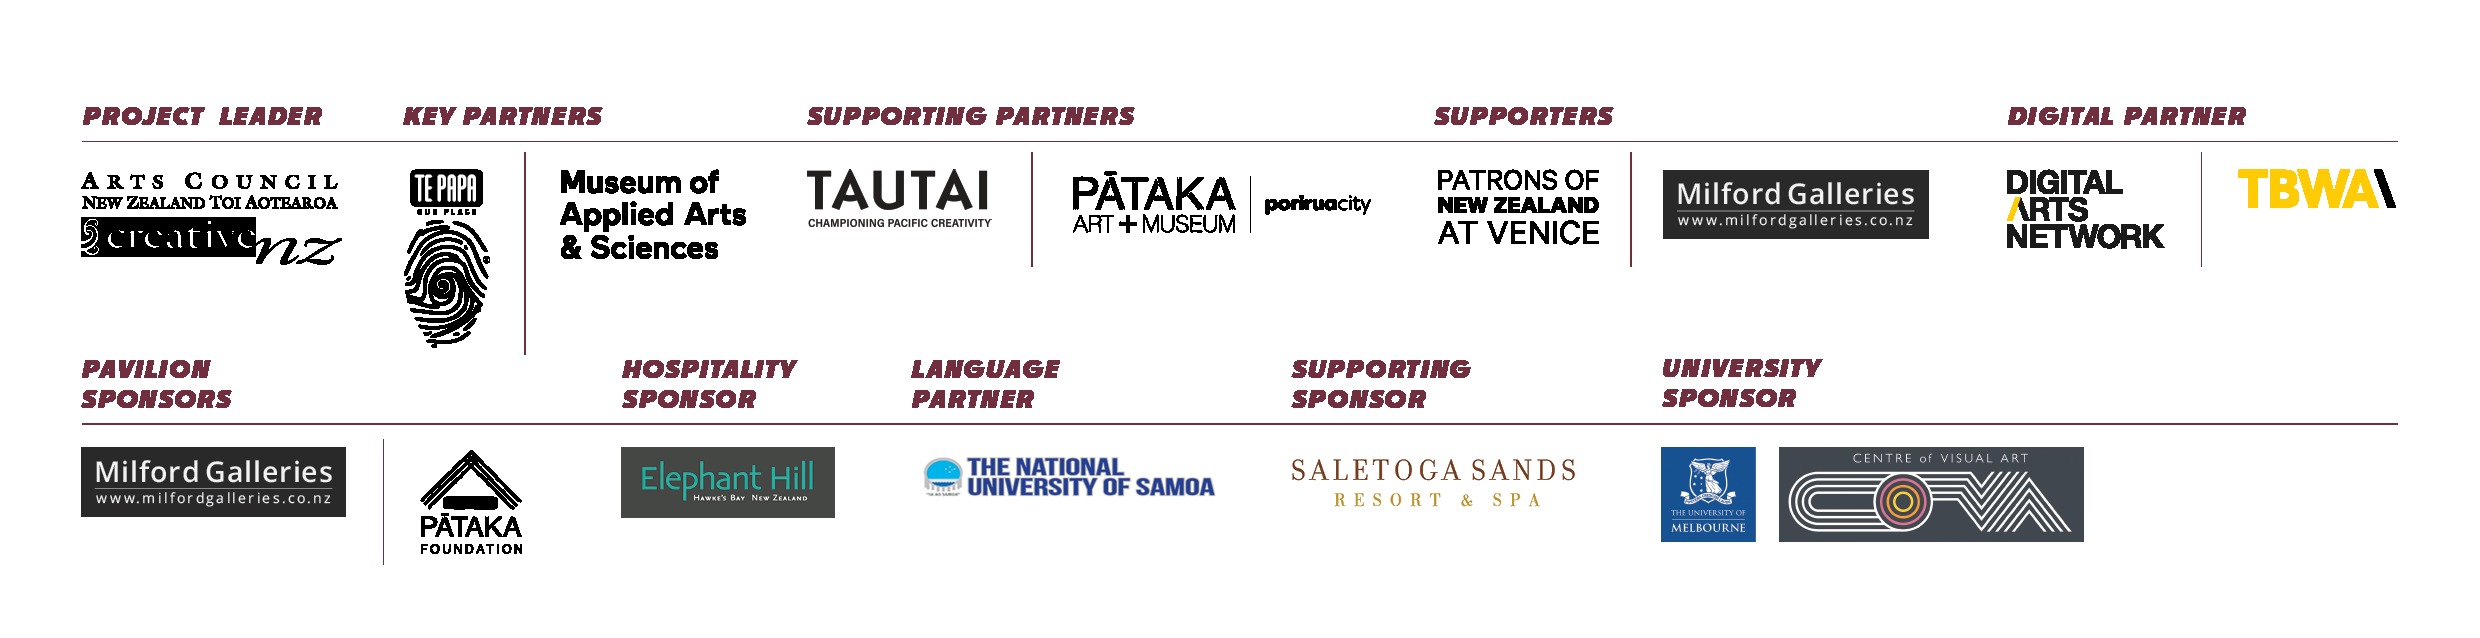 Logos of the project leader, partners, sponsors and supporters.